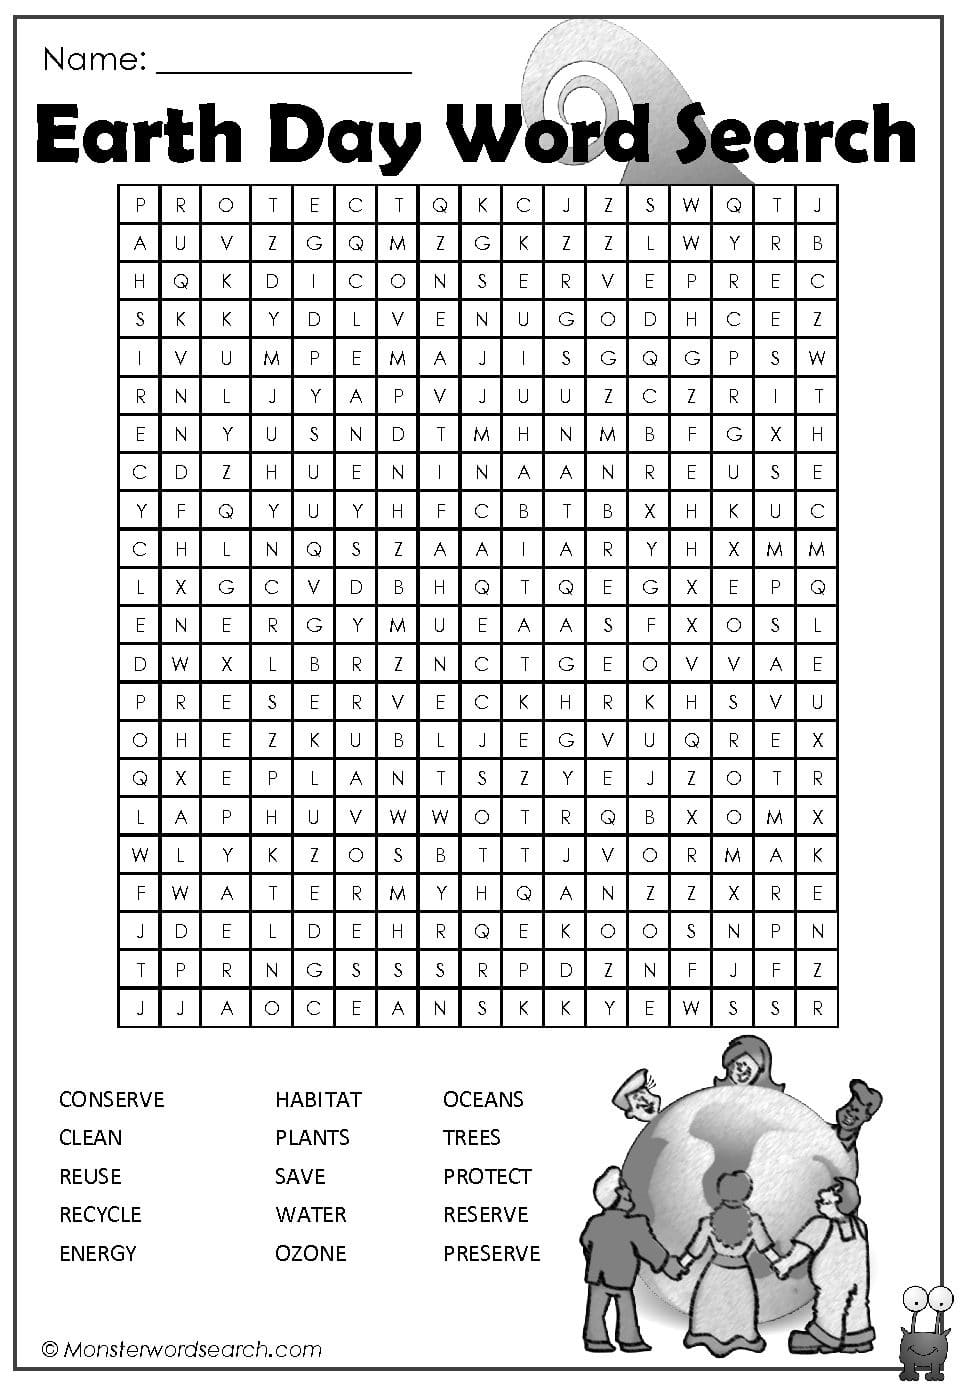 earth-day-word-search-monster-word-search